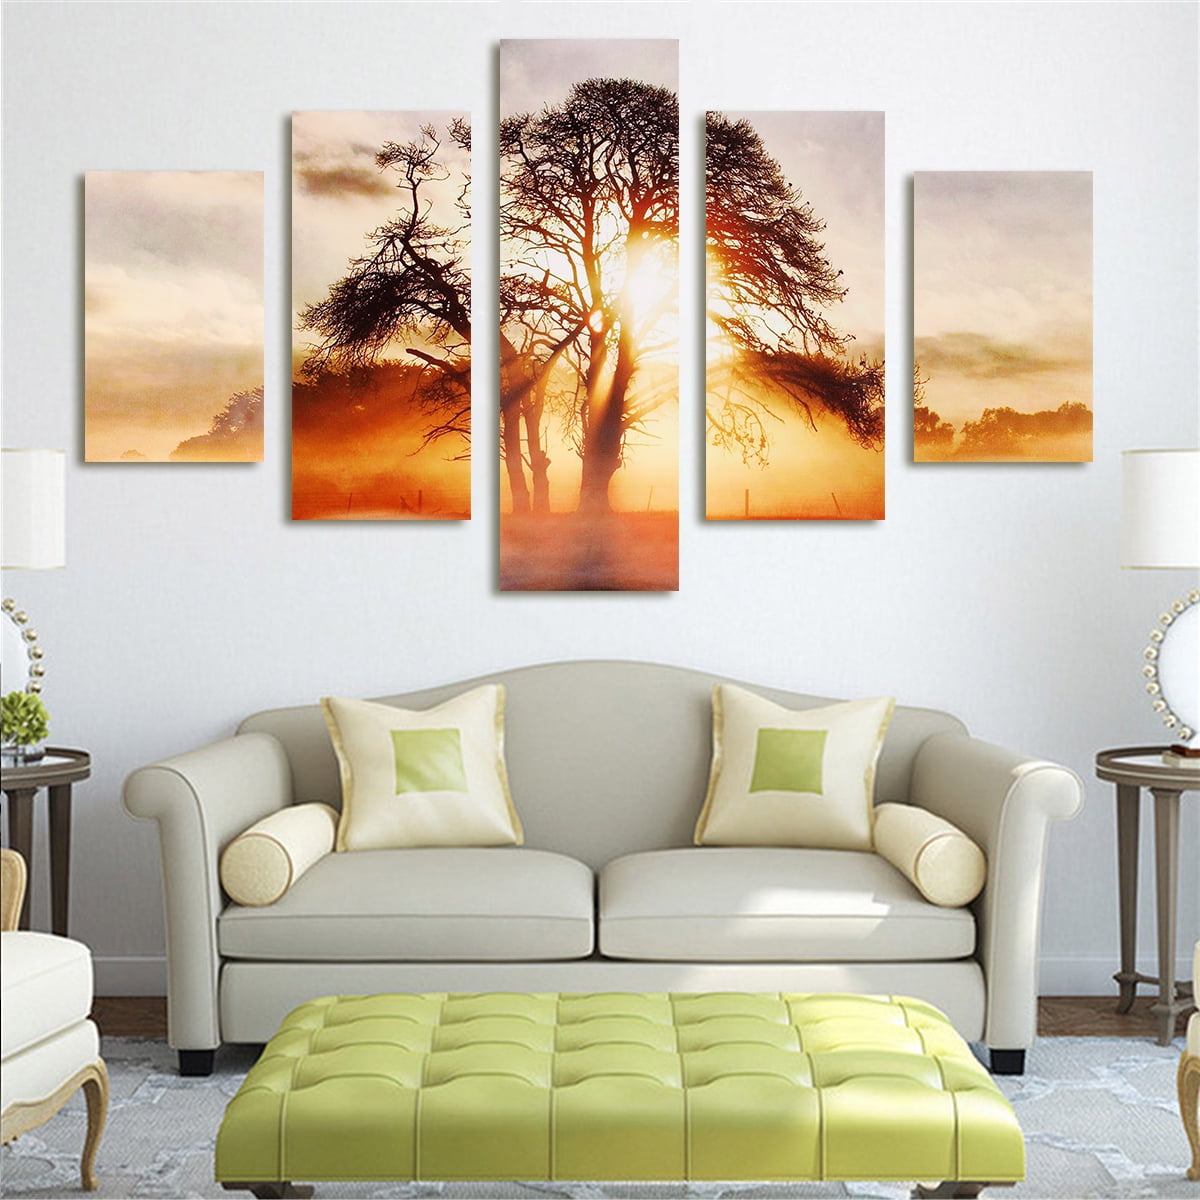 5pcs/Set Canvas Painting Wall Art Landscape Print And poster Home Decor Unframed 